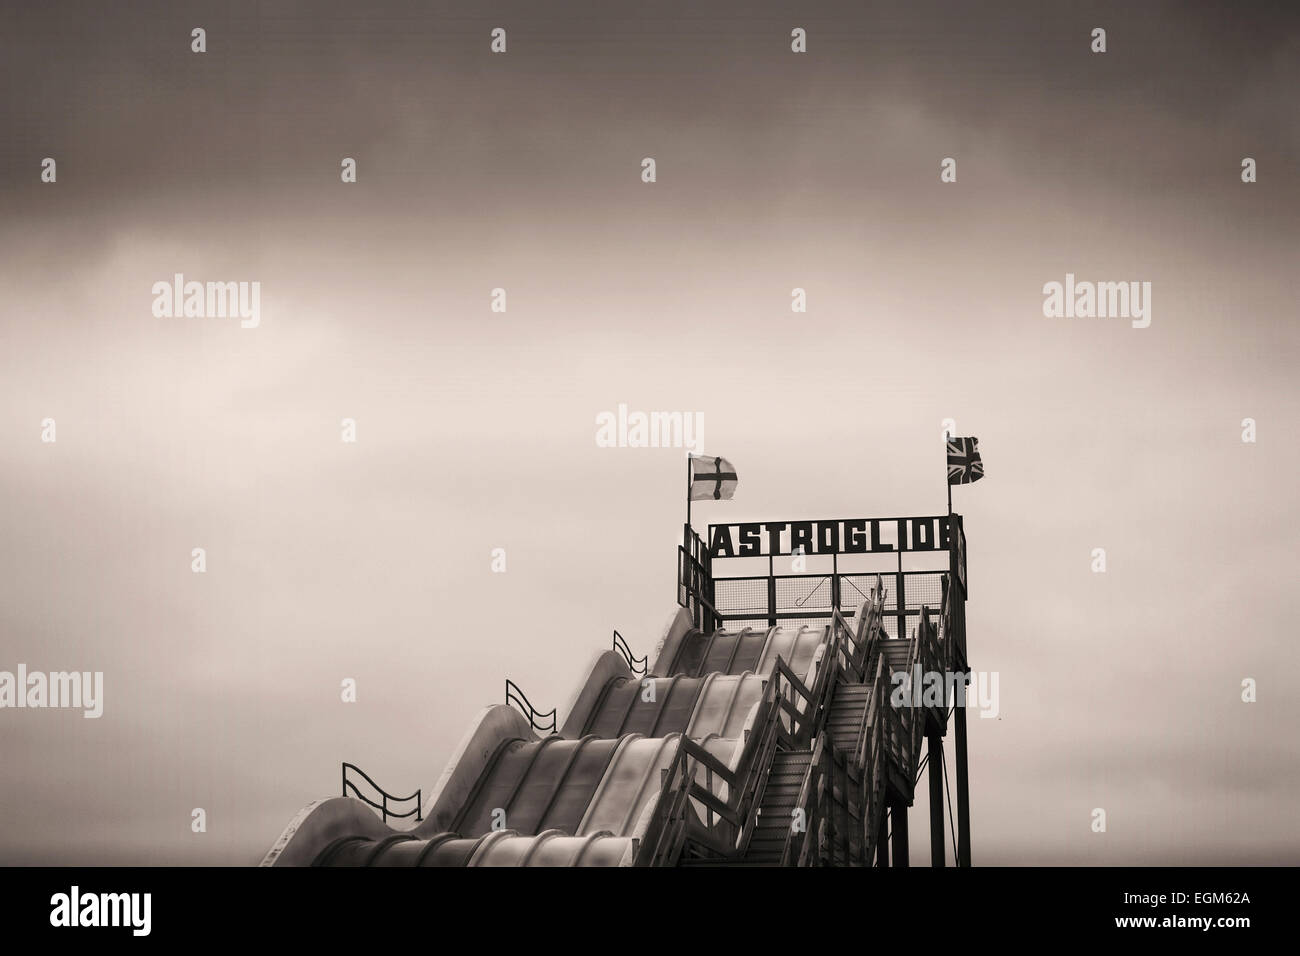 A disused Astroglide slide at an amusement park. Stock Photo